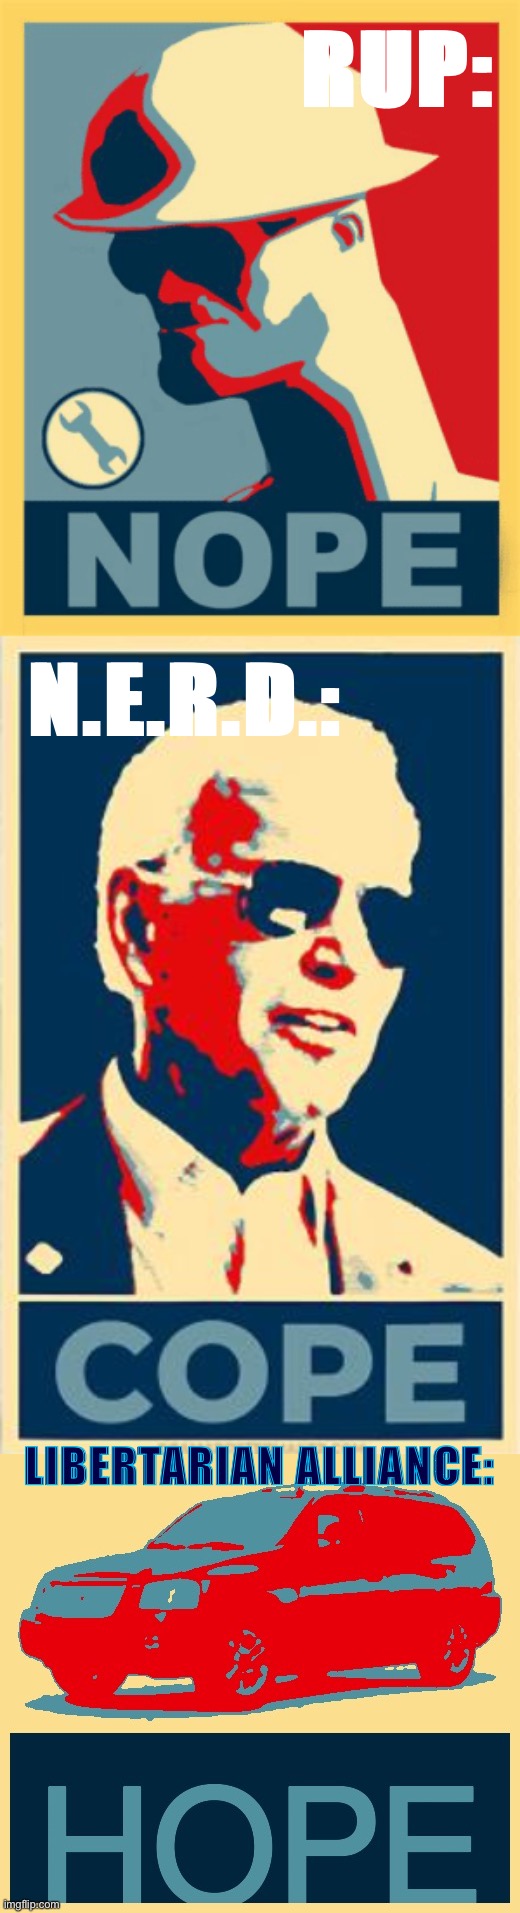 This is beyond science | RUP:; N.E.R.D.:; LIBERTARIAN ALLIANCE: | image tagged in tf2 nope,biden cope,envoy hope,nope,cope,hope | made w/ Imgflip meme maker